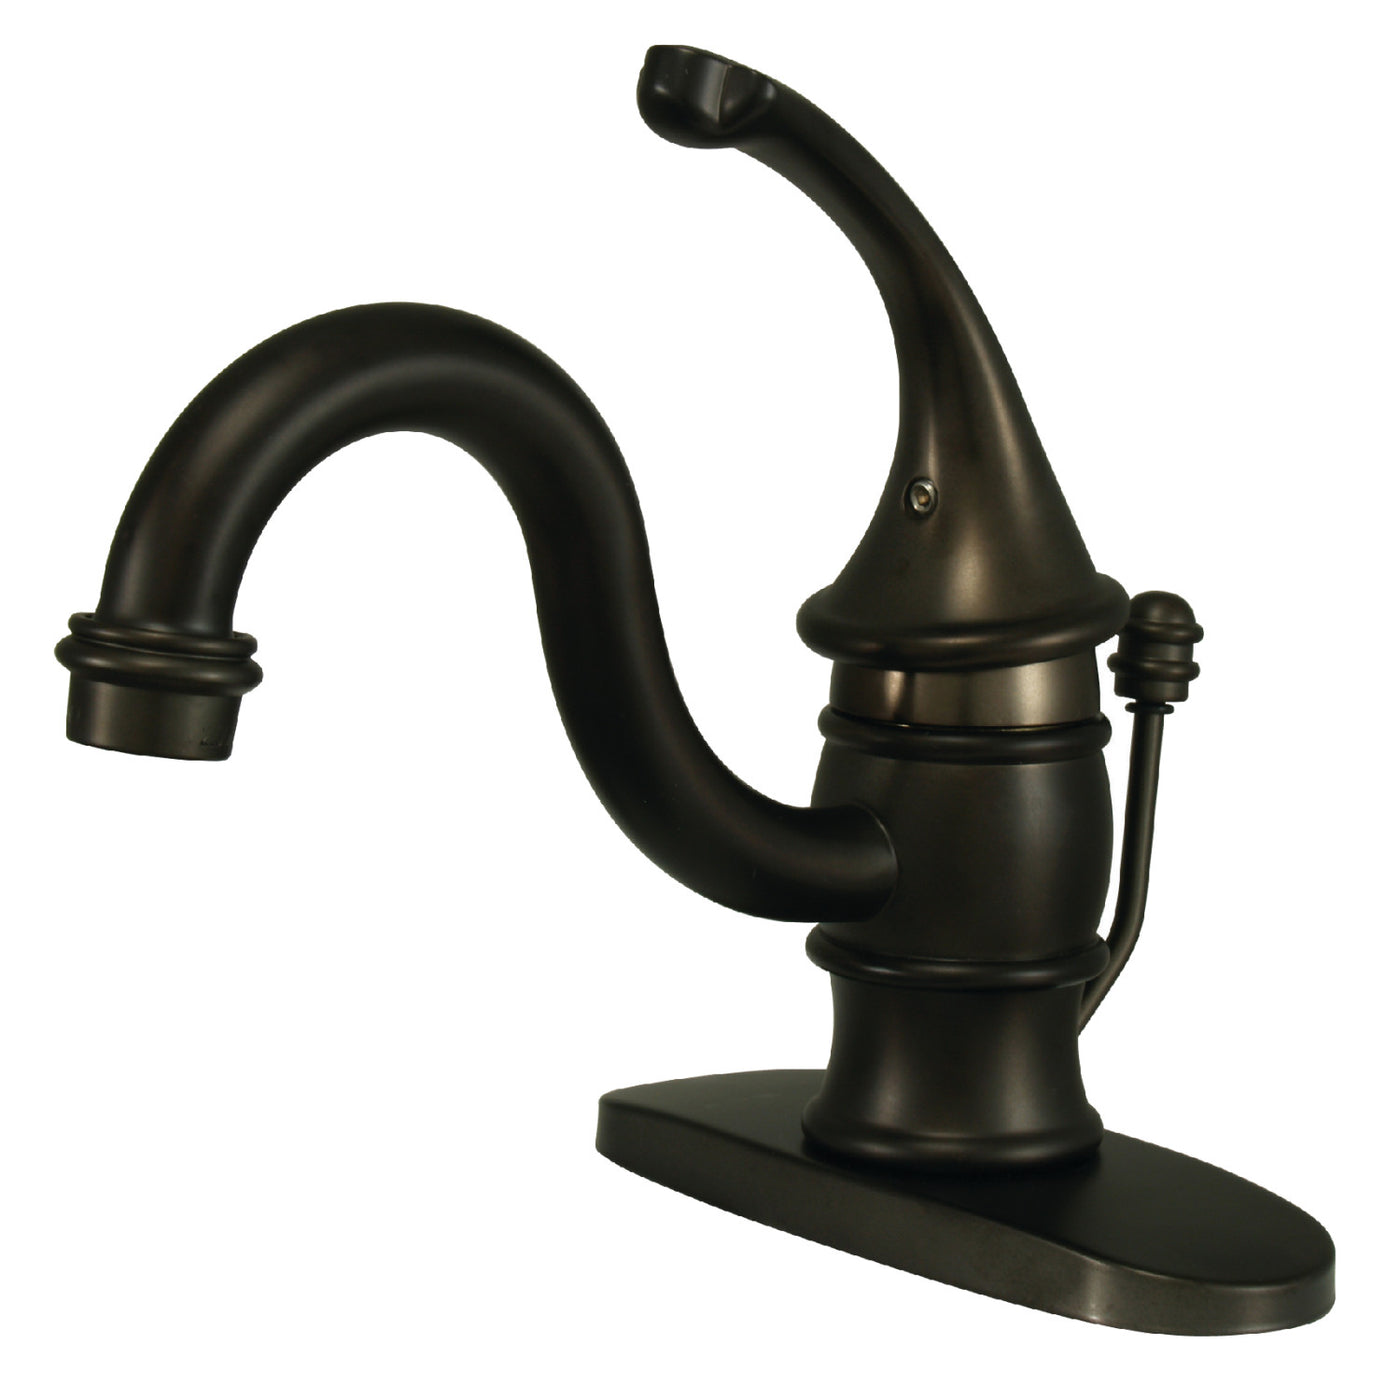 Elements of Design EB3405GL Single-Handle Bathroom Faucet with Pop-Up Drain, Oil Rubbed Bronze